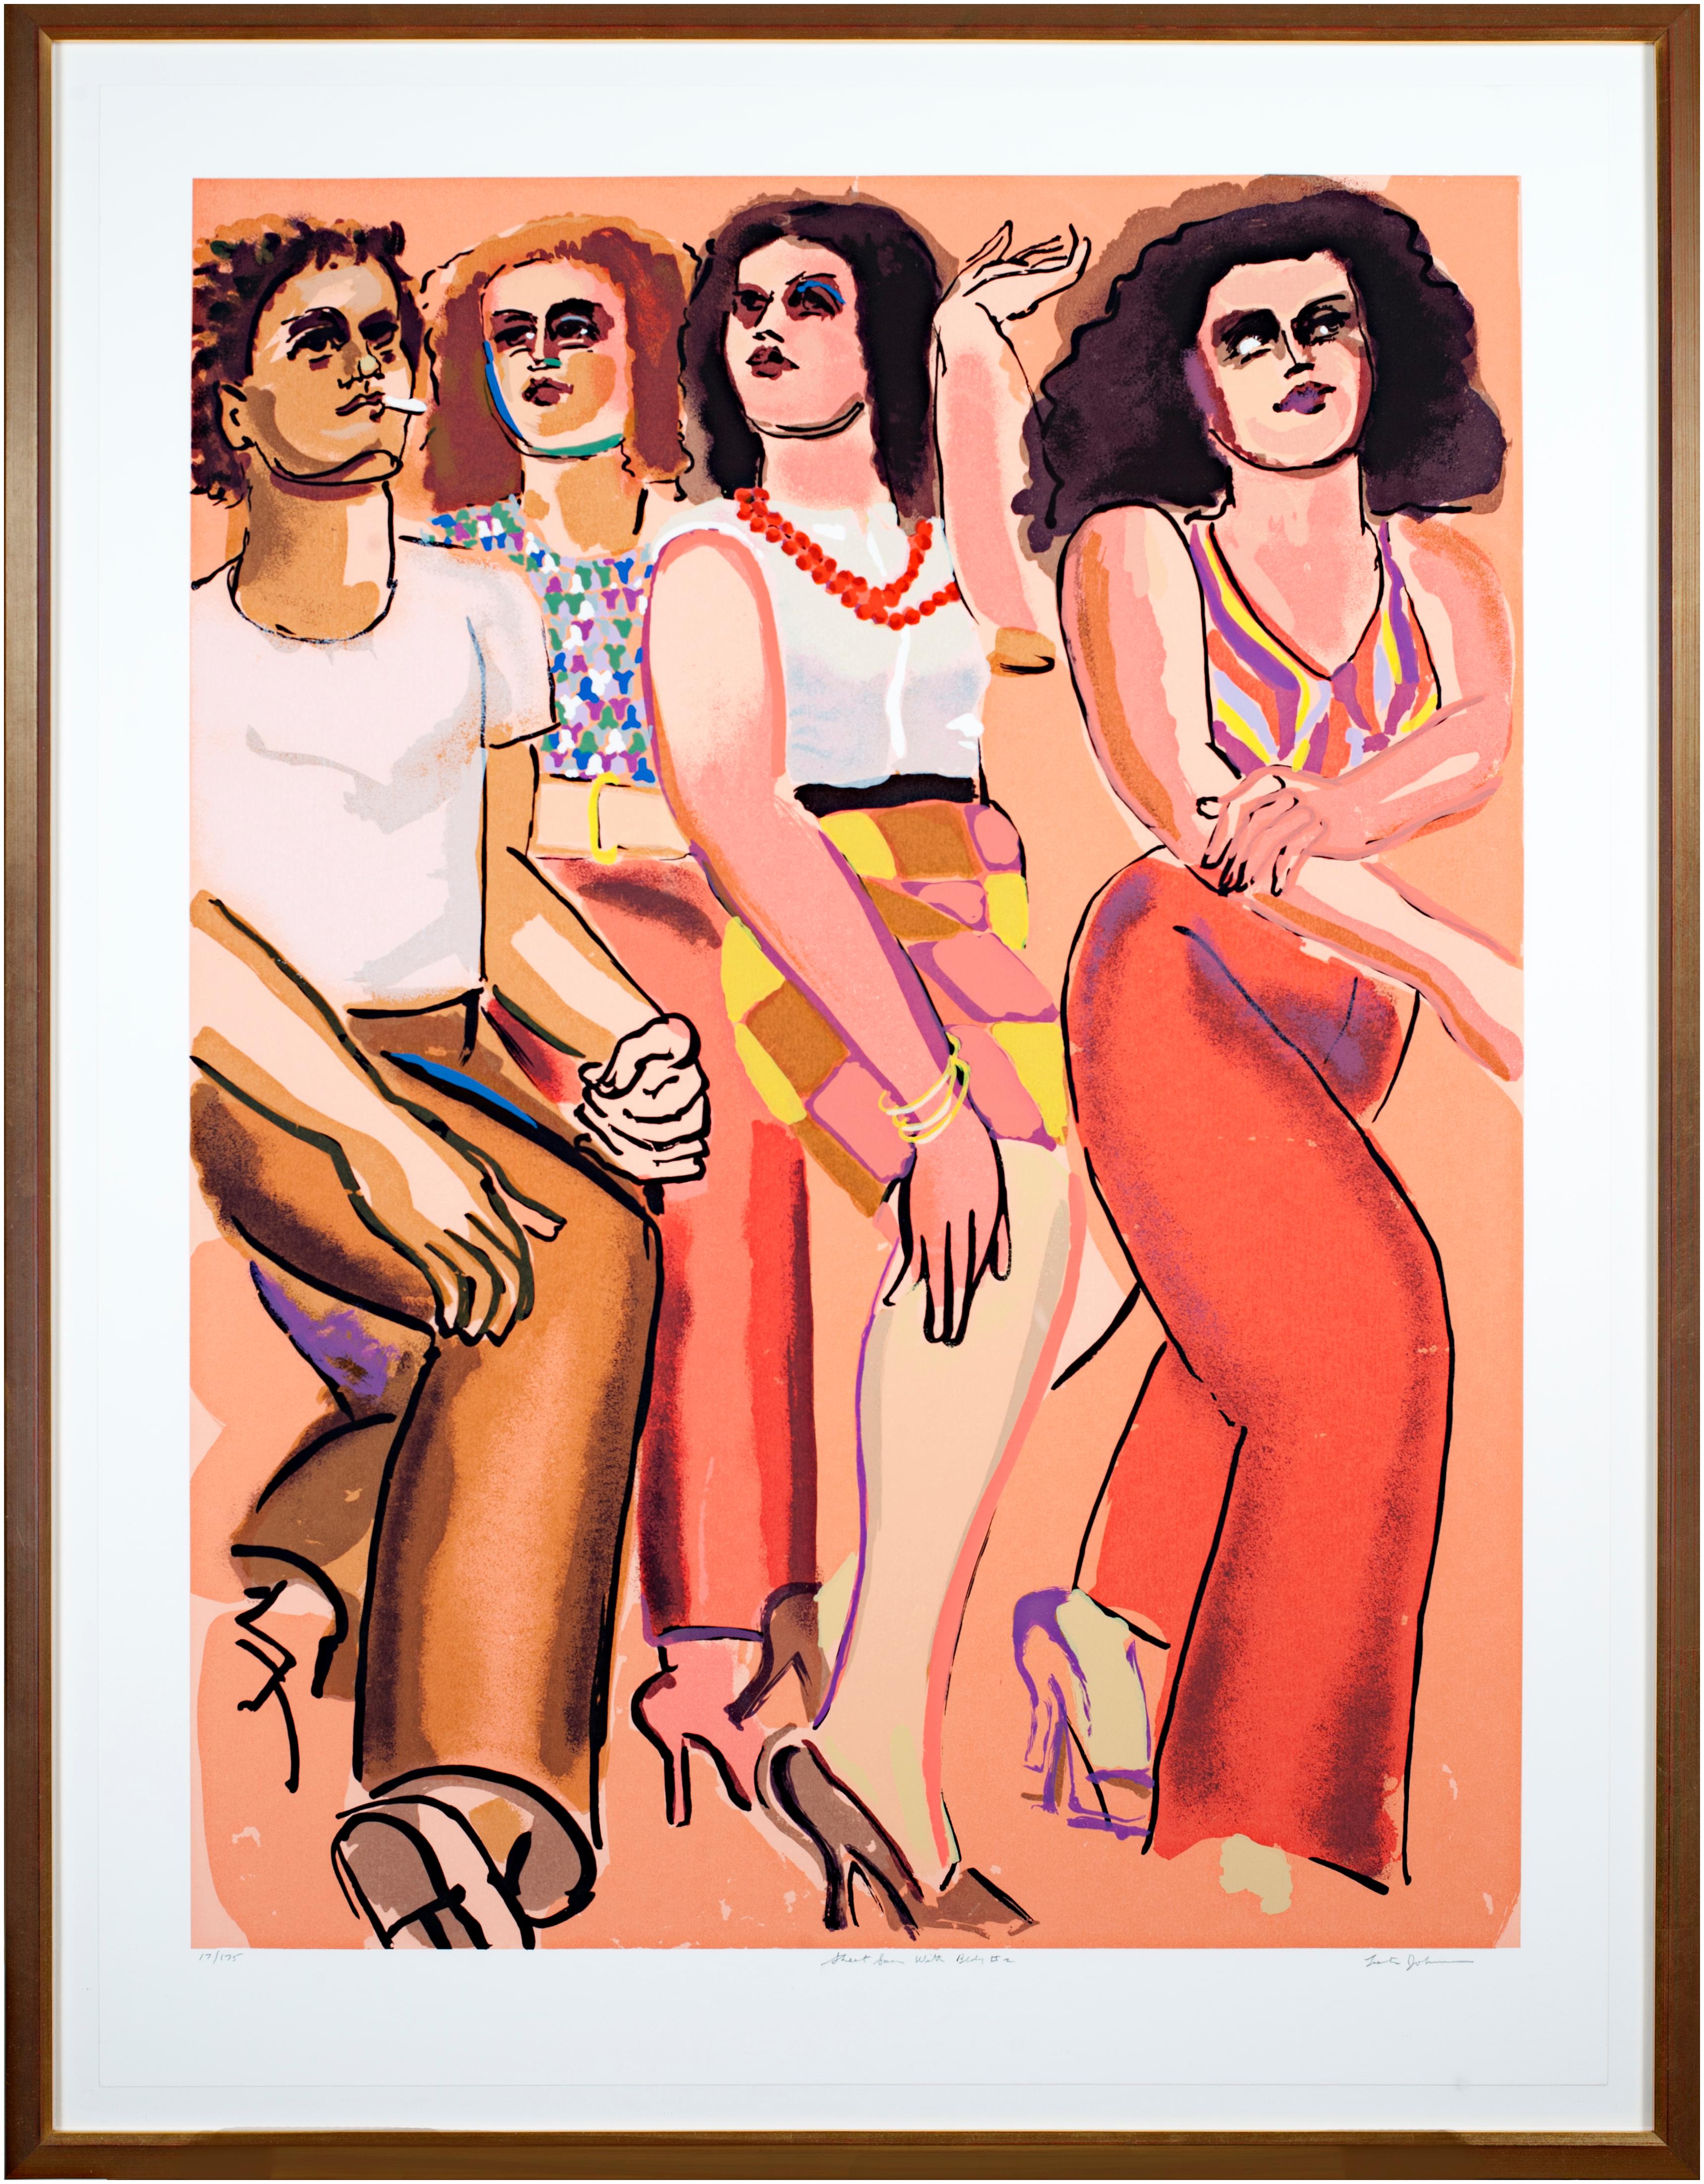 The present work is an original screen print signed by Lester Johnson, from his 'Street Scene Portfolio.' It features four figures, all wearing fashionable street clothing emblematic of youth culture and life. Johnson's use of color and his